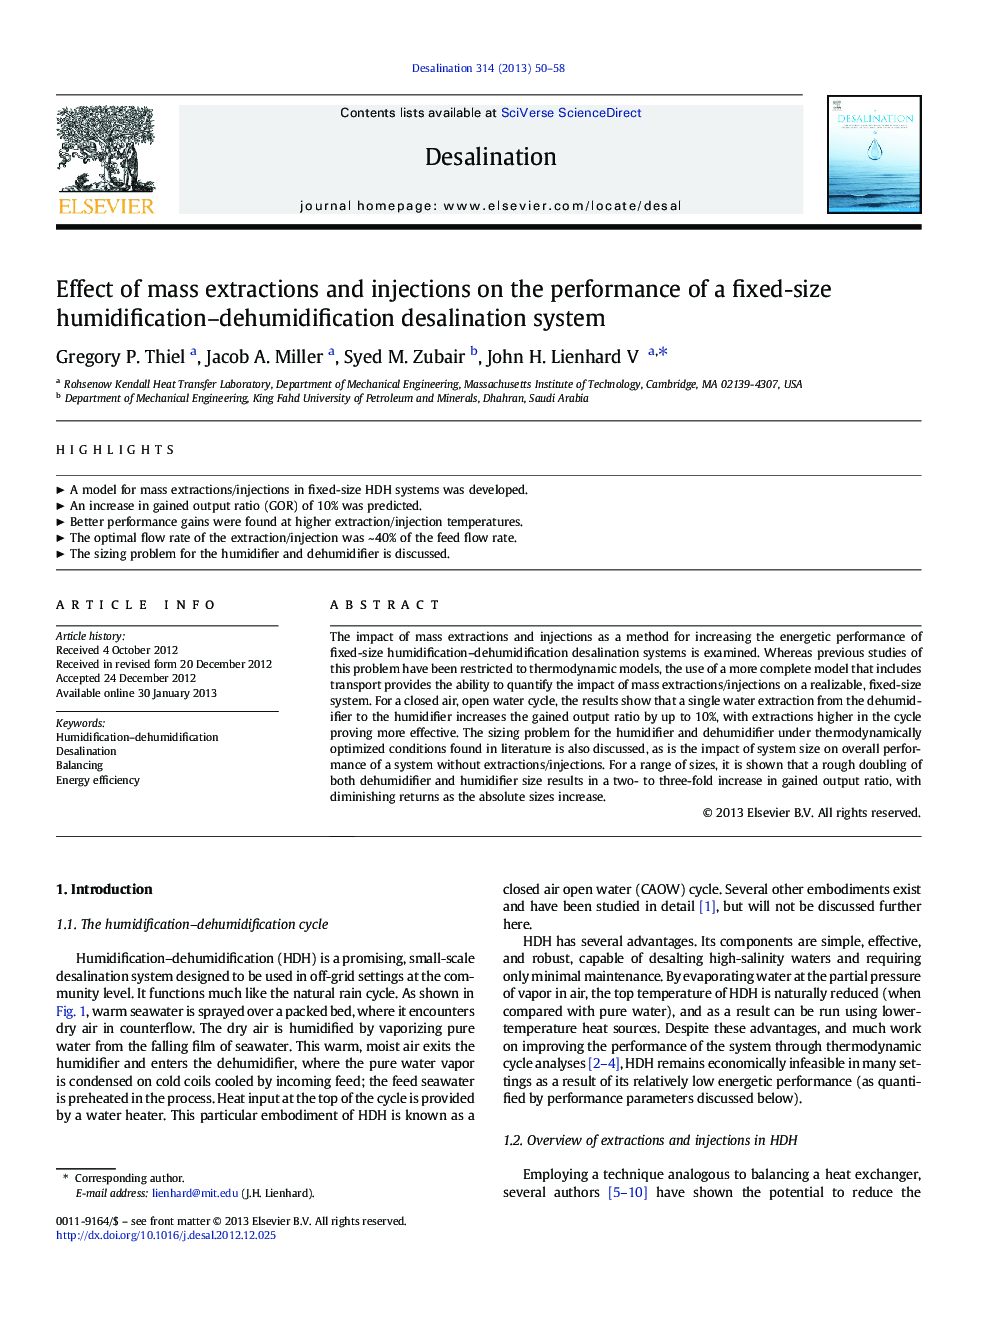 Effect of mass extractions and injections on the performance of a fixed-size humidification-dehumidification desalination system